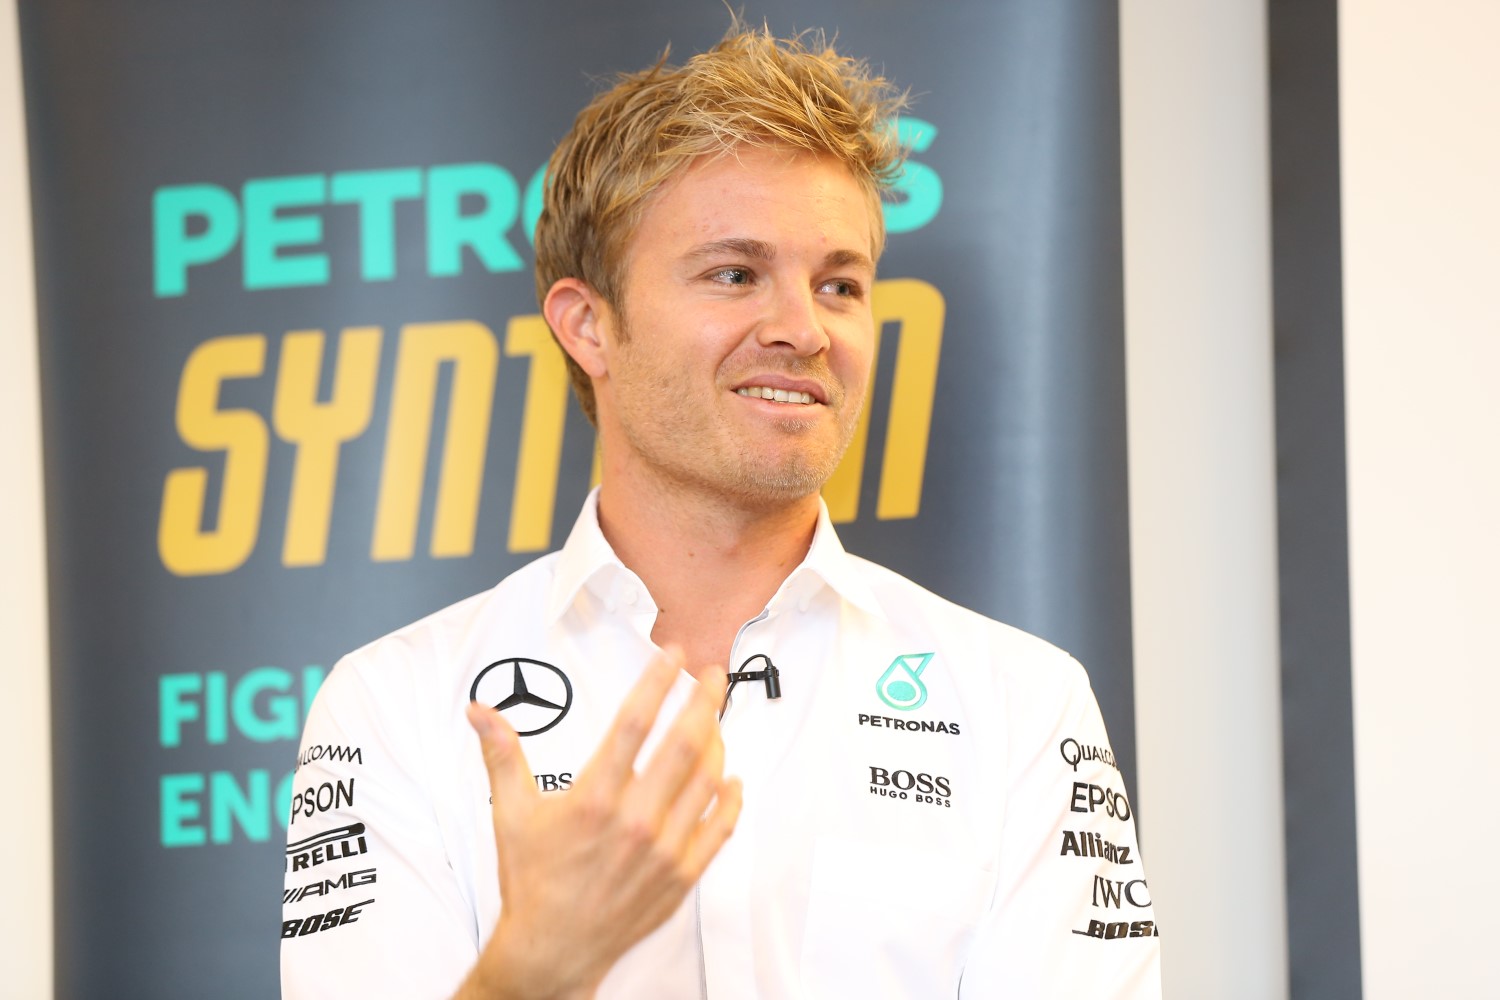 Will the Mercedes computers be programmed for a Rosberg win in Abu Dhabi?